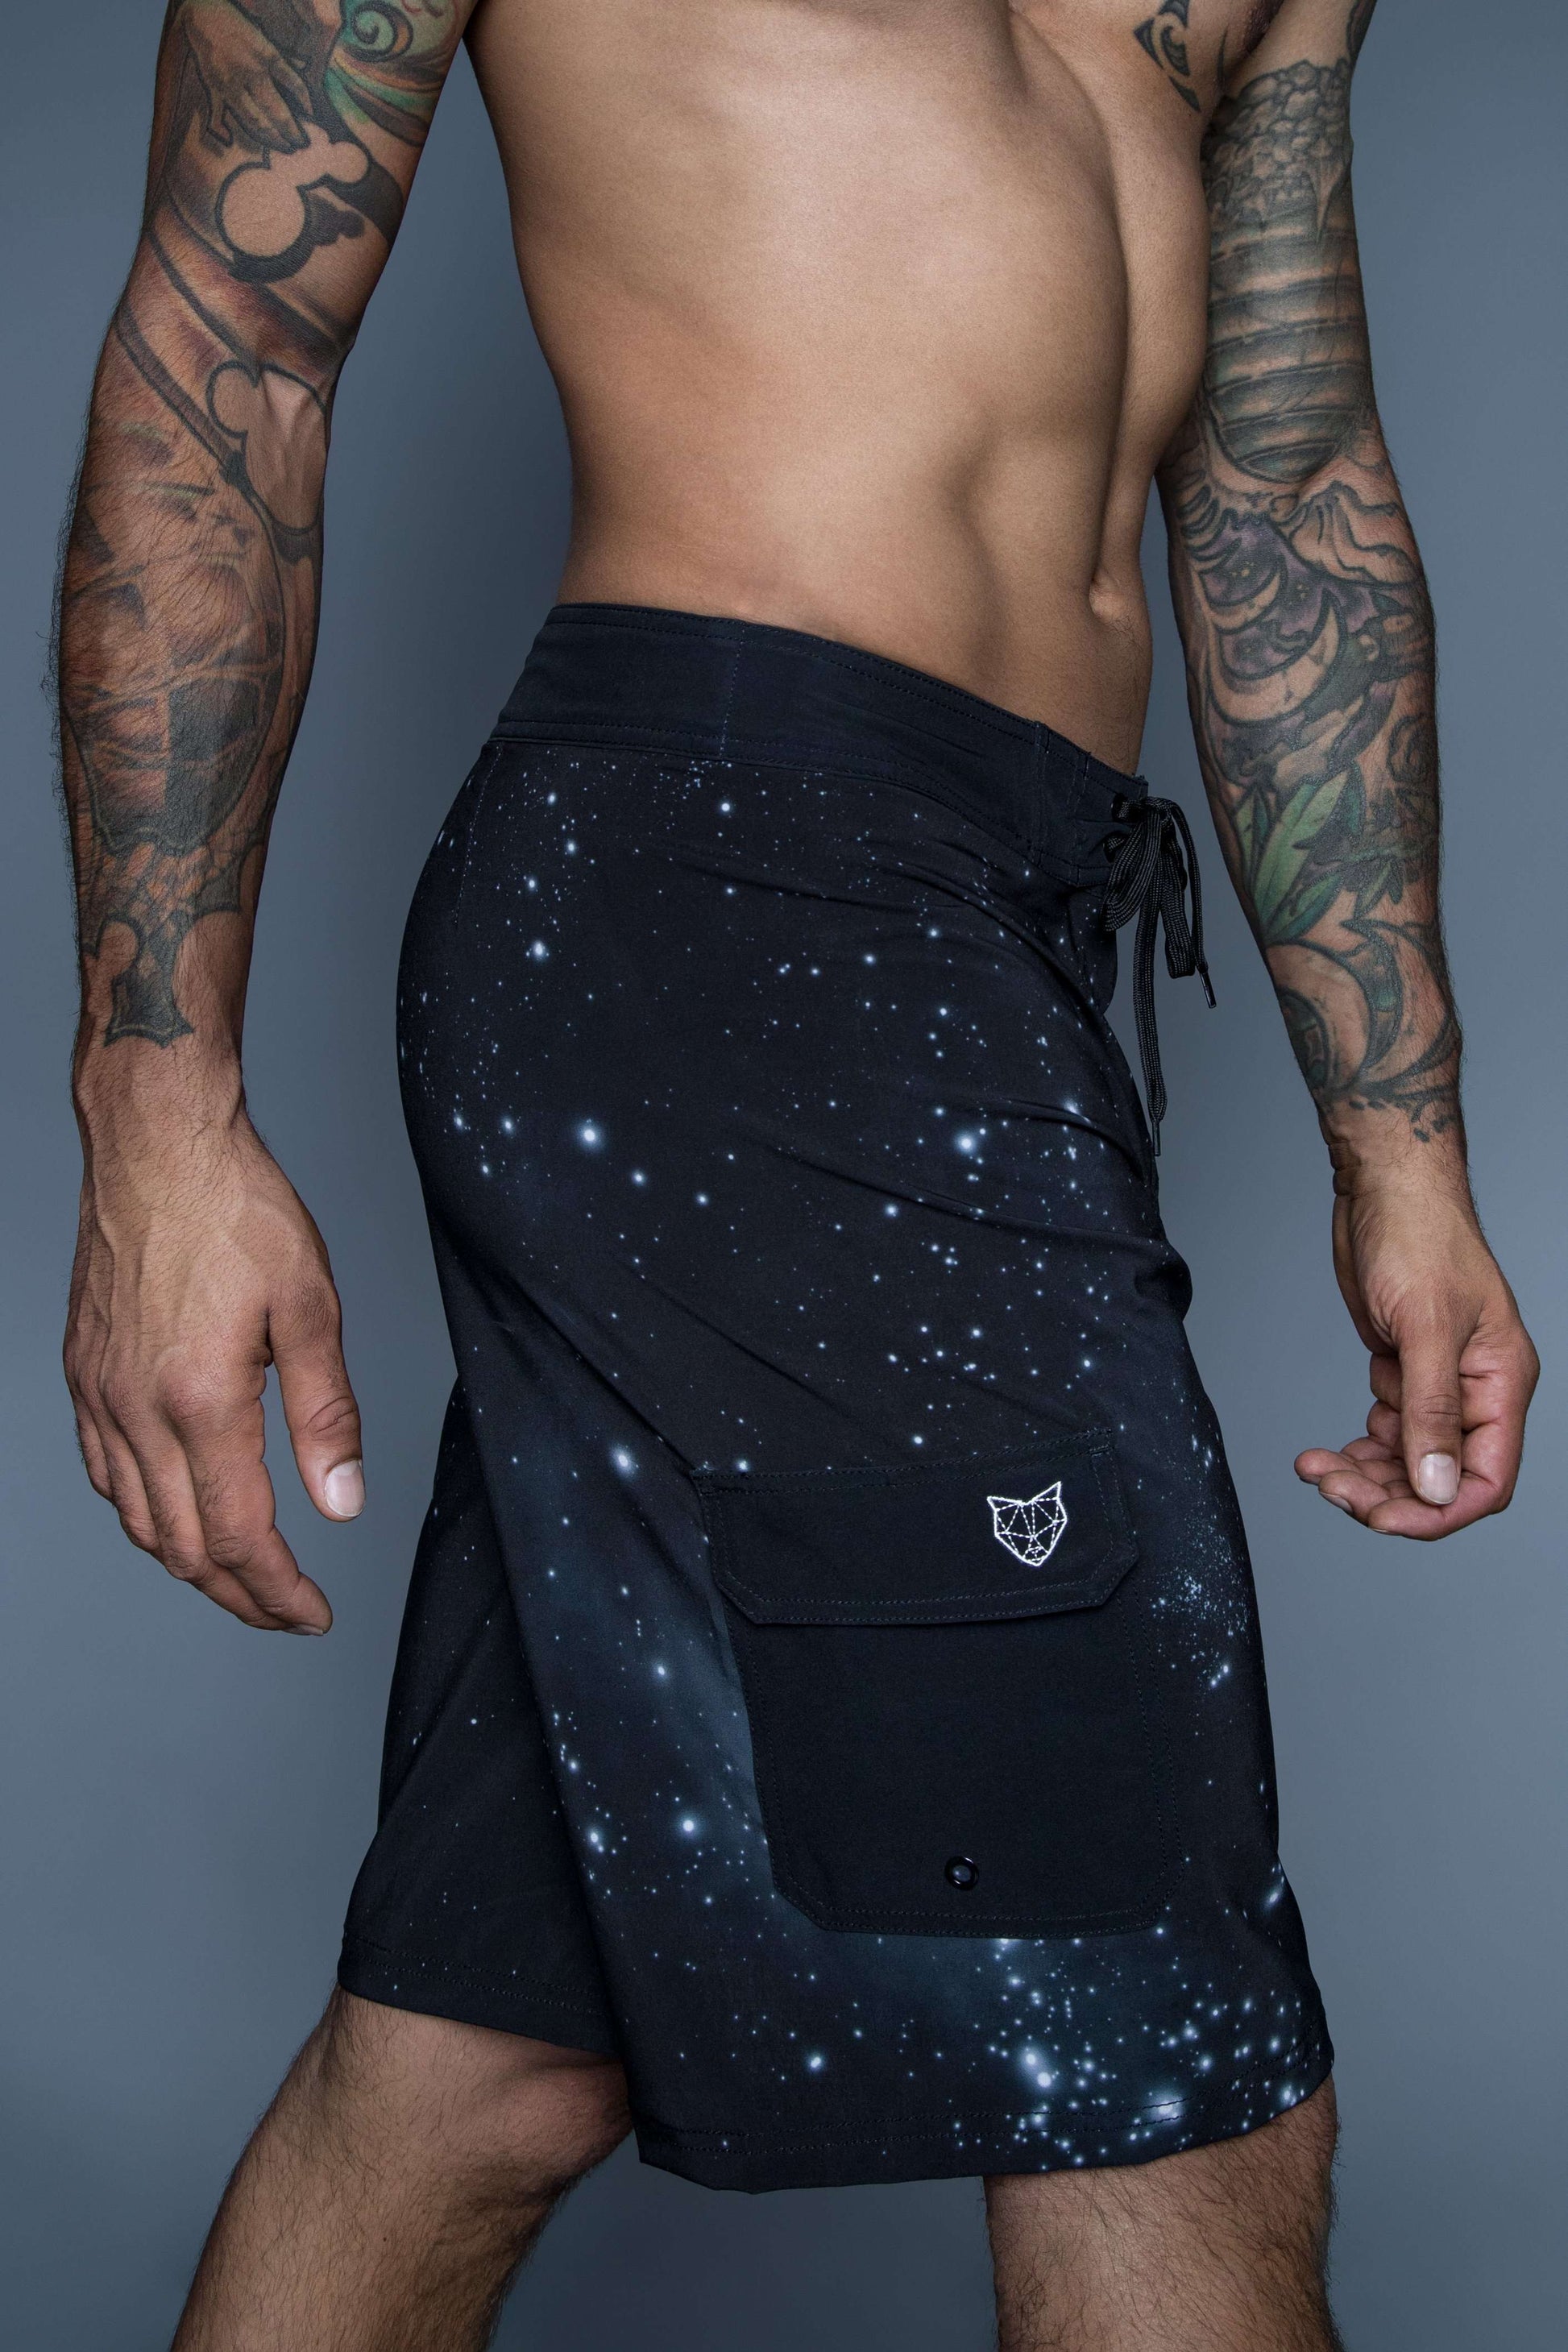 The Navas Lab Zod boardshorts for tall guys in space (black with white details). The perfect boardshorts for tall men.